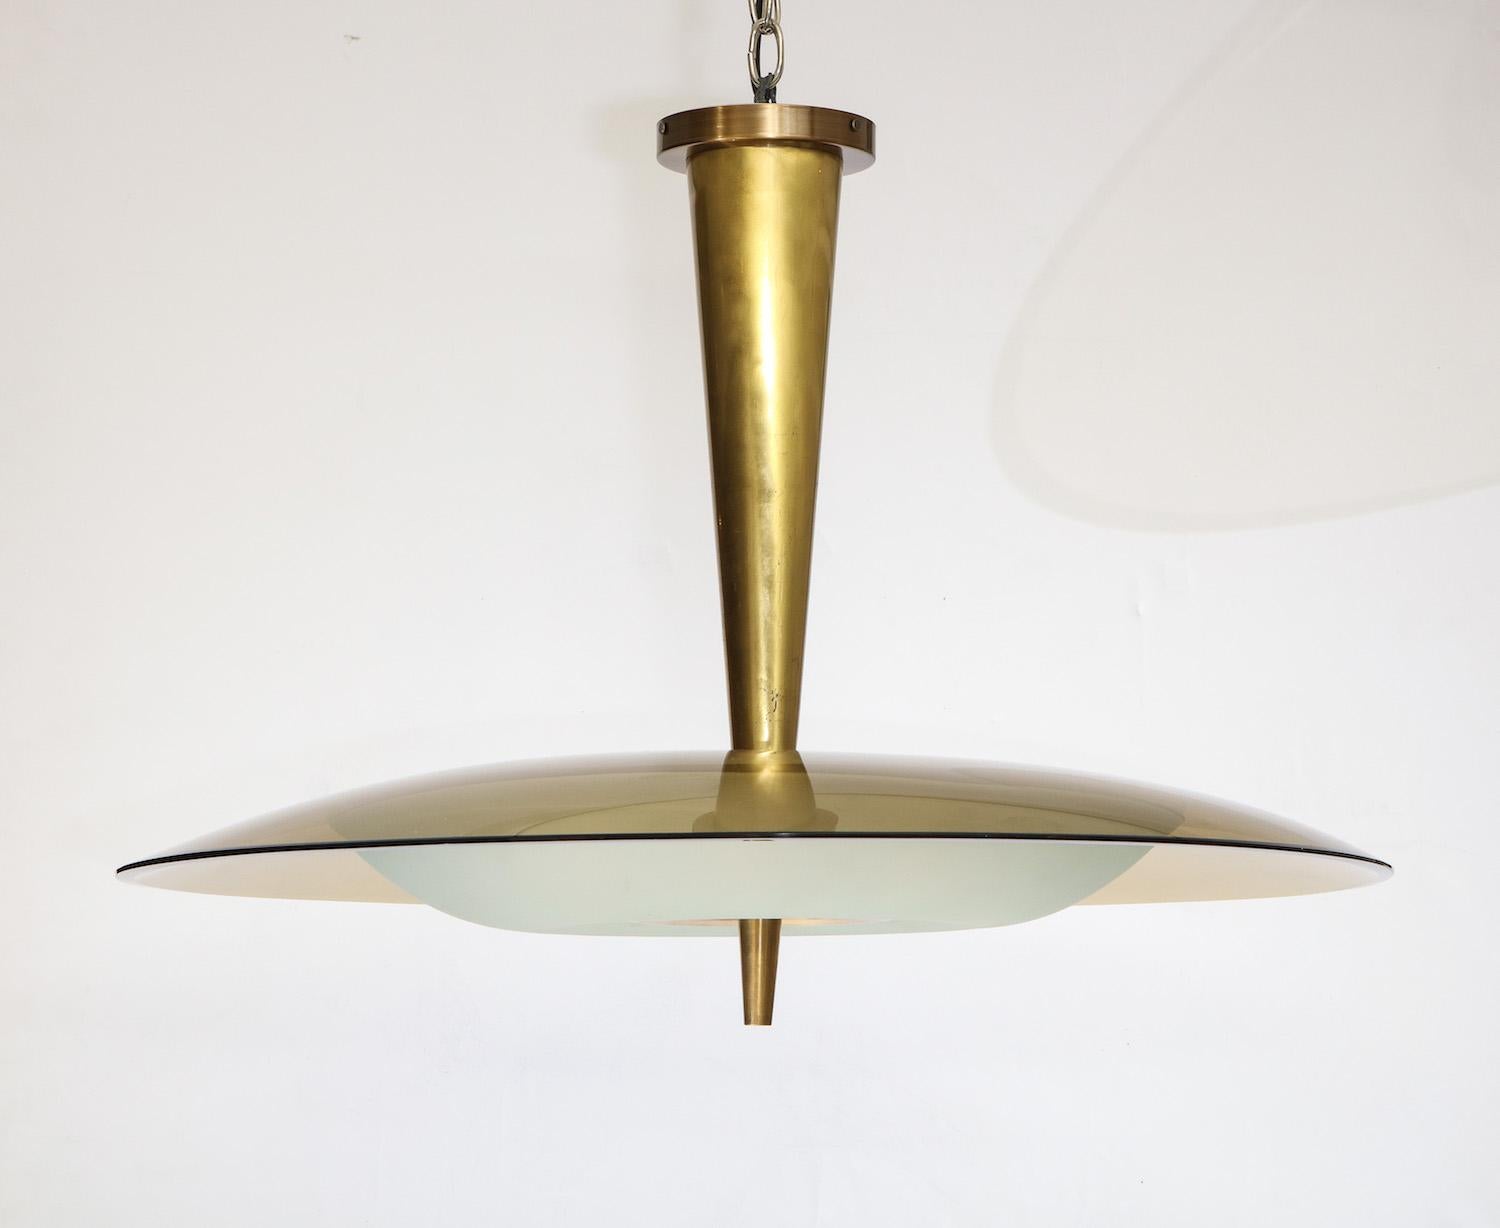 Rare pendant #1462 by Max Ingrand for Fontana Arte. Fantastic Max Ingrand saucer pendant featuring a large bronze glass dish and a lower acid-etched bowl with brass mounts. 8 candelabra sockets, recently replaced and newly rewired. Published: